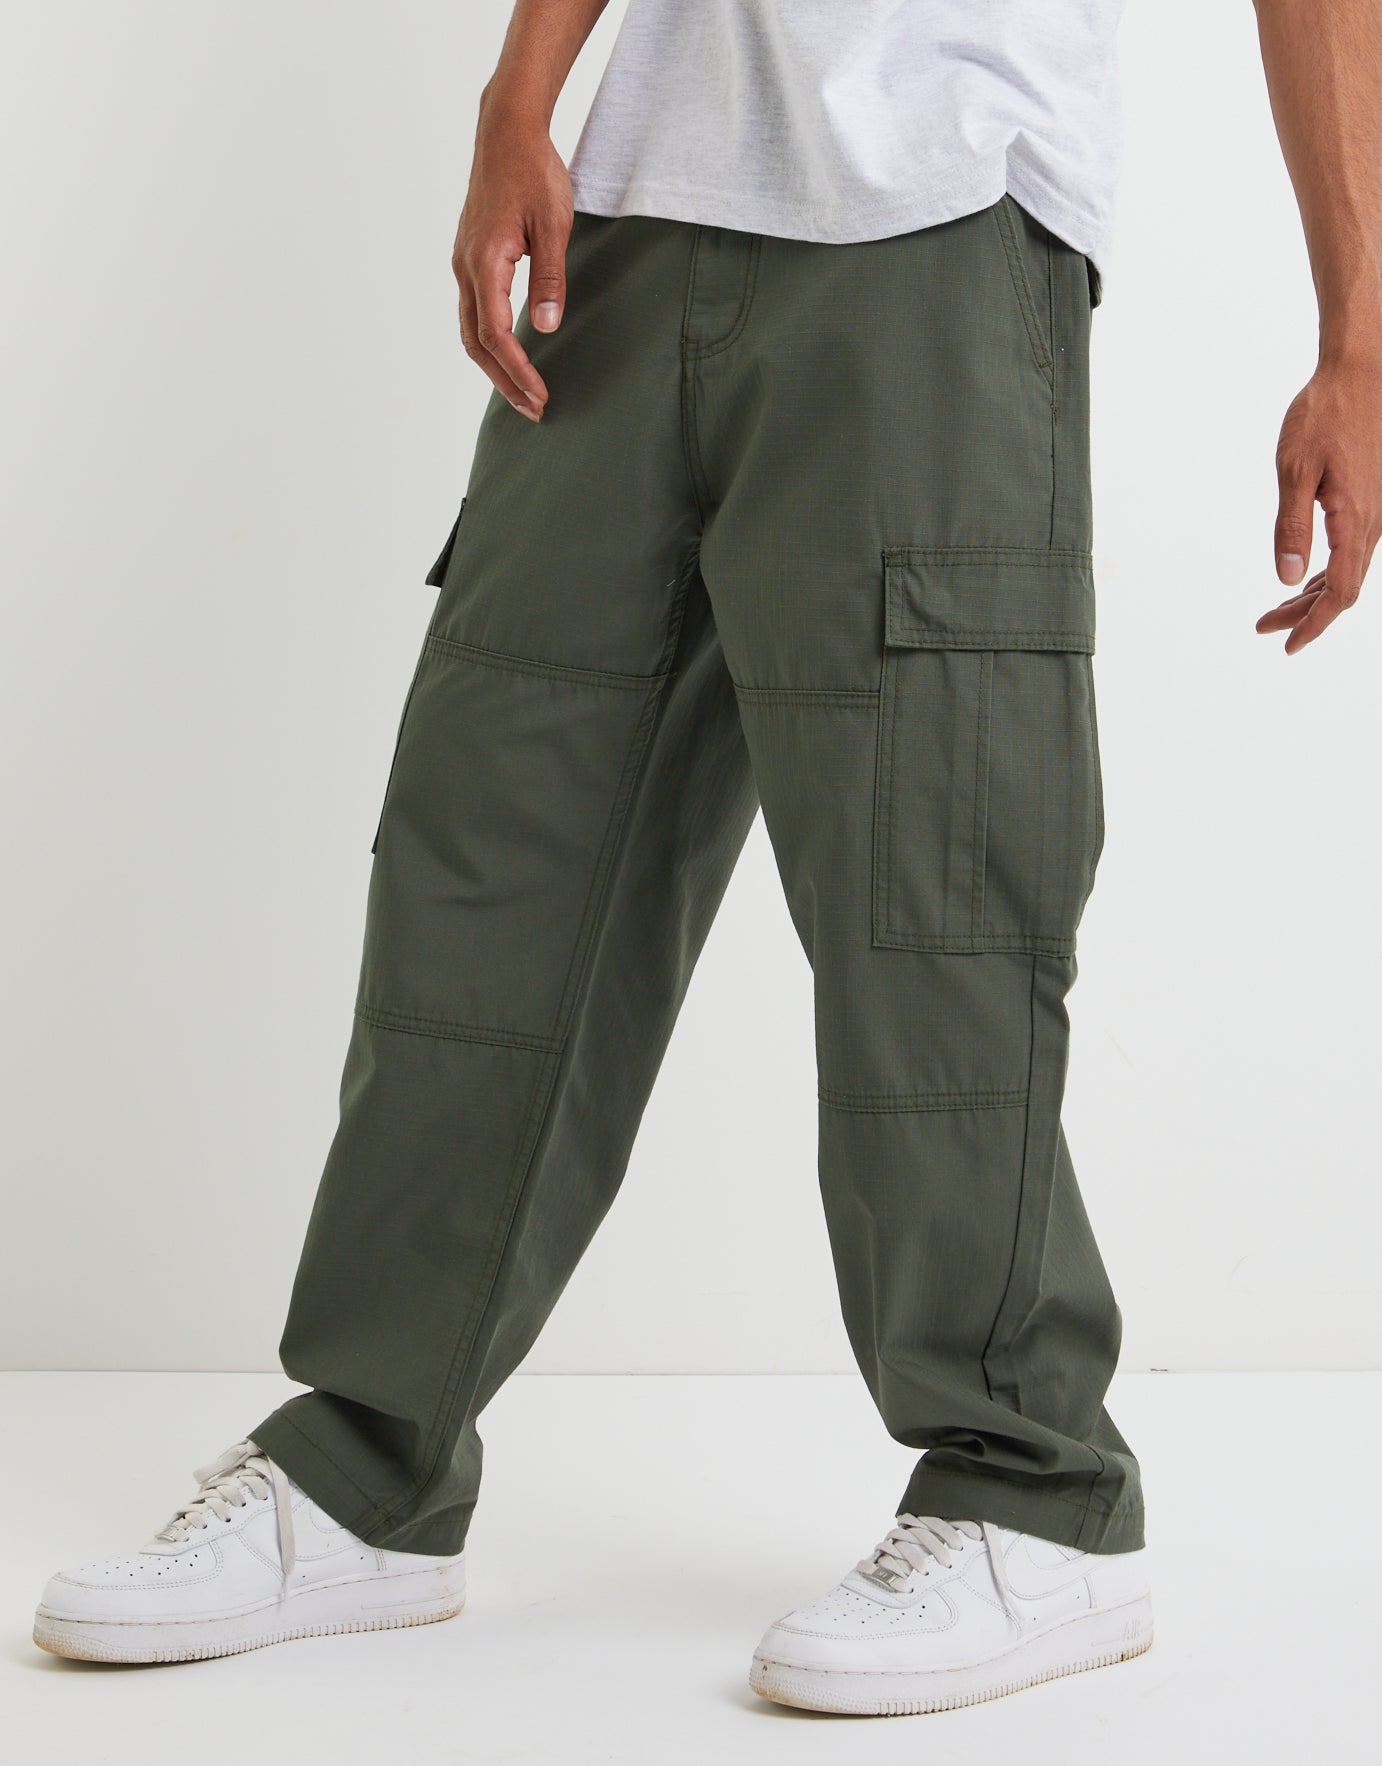 symoid Cargo Pants for Men- Solid Casual Multiple Pockets Outdoor Straight  Type Fitness Pants Cargo Pants Trousers Black